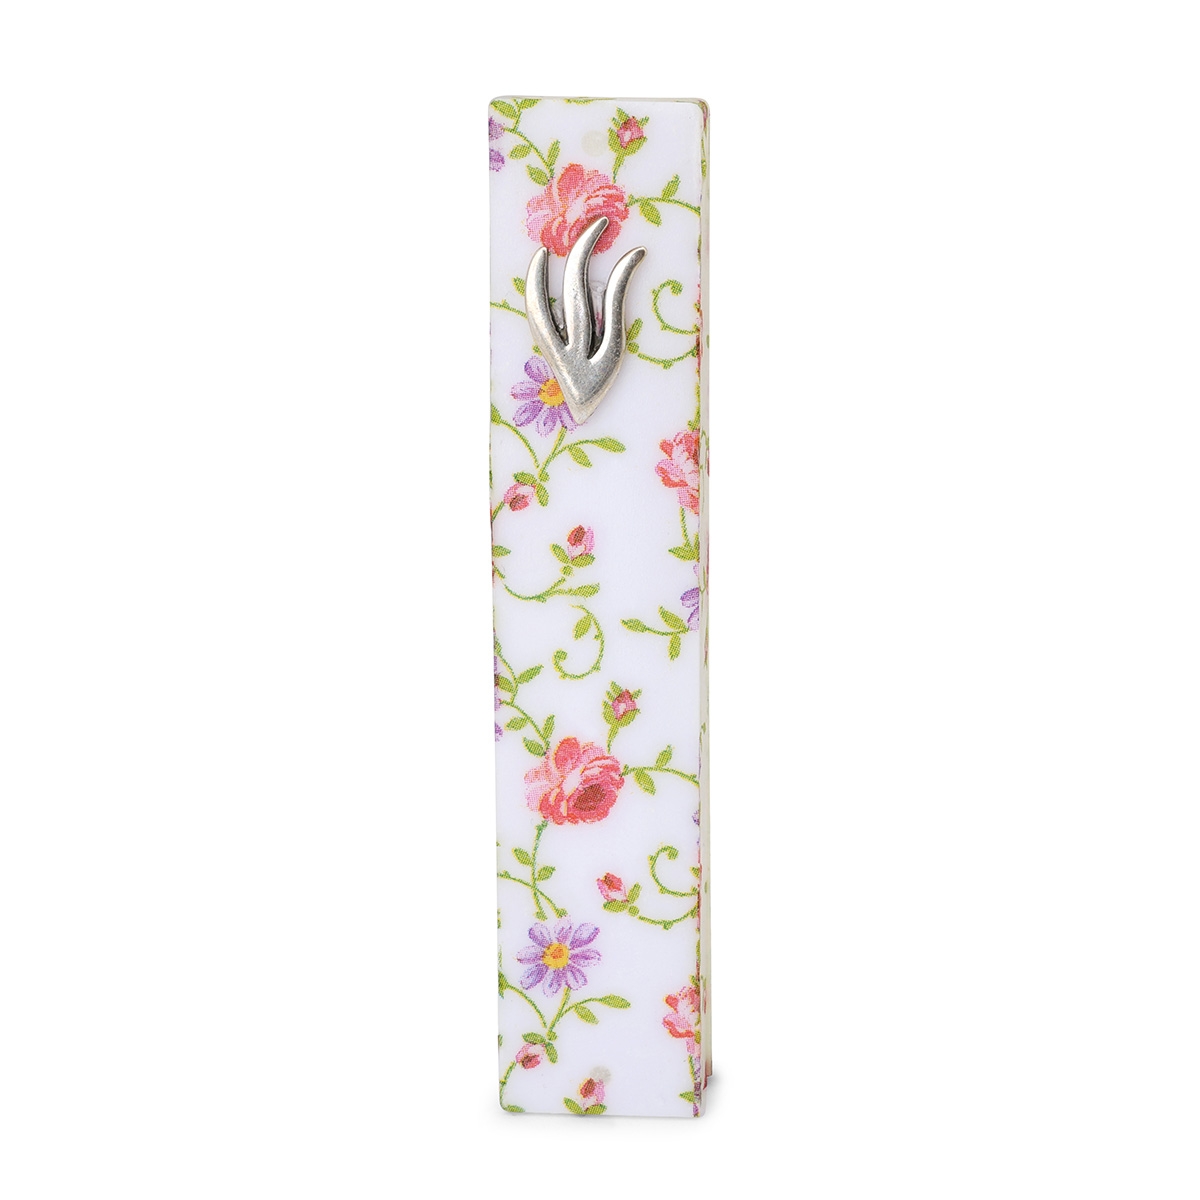 Lily Art Acrylic Pink and White Floral Mezuzah Case  - 1